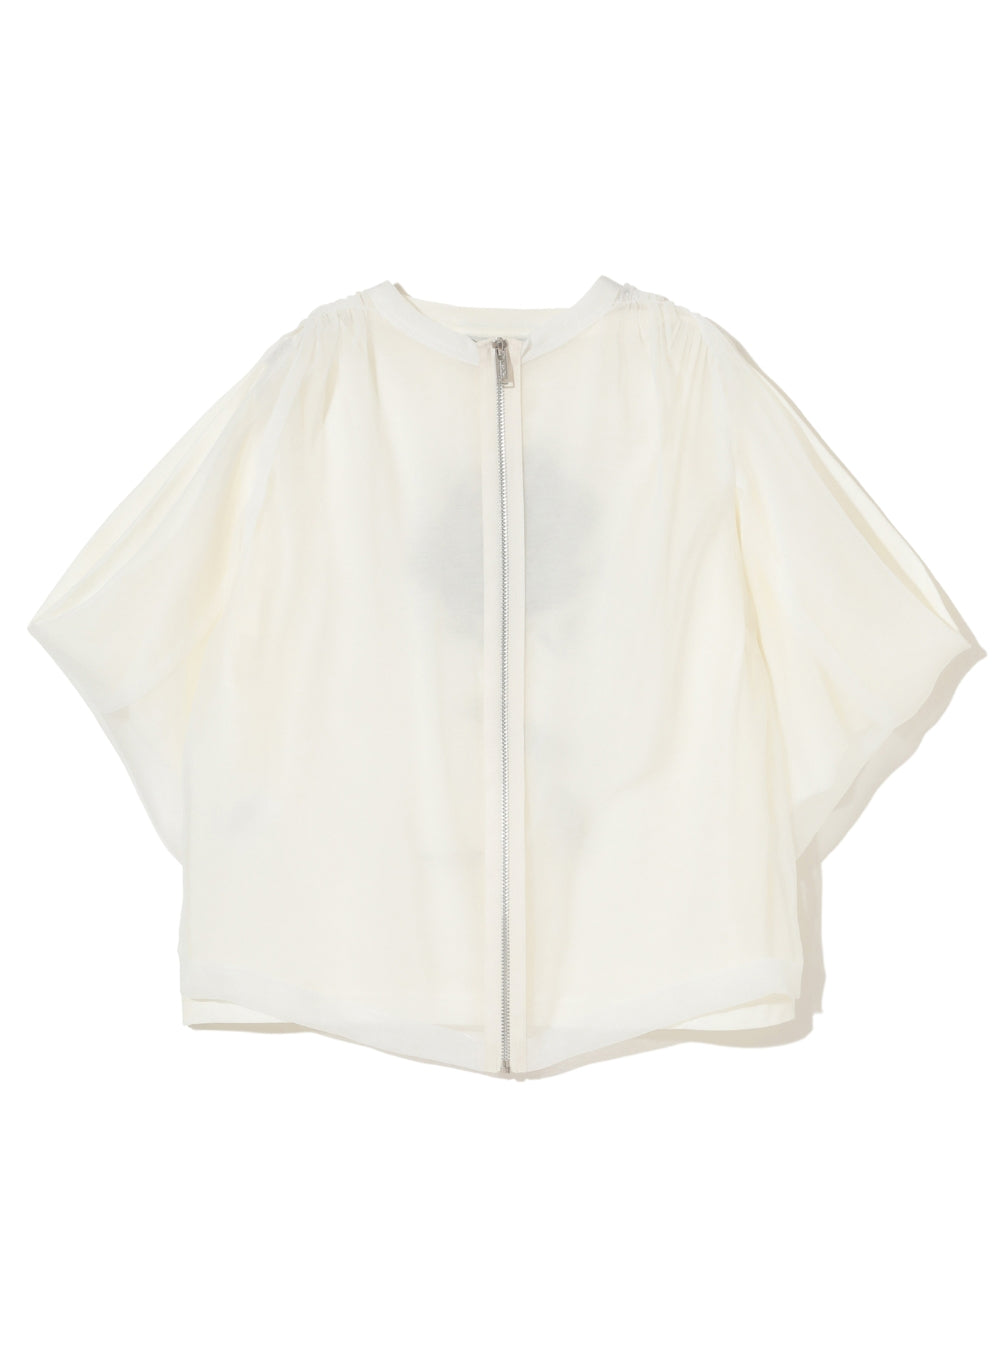 UNDERCOVER | Sheer Overlay Cold-Shoulder Graphic Top